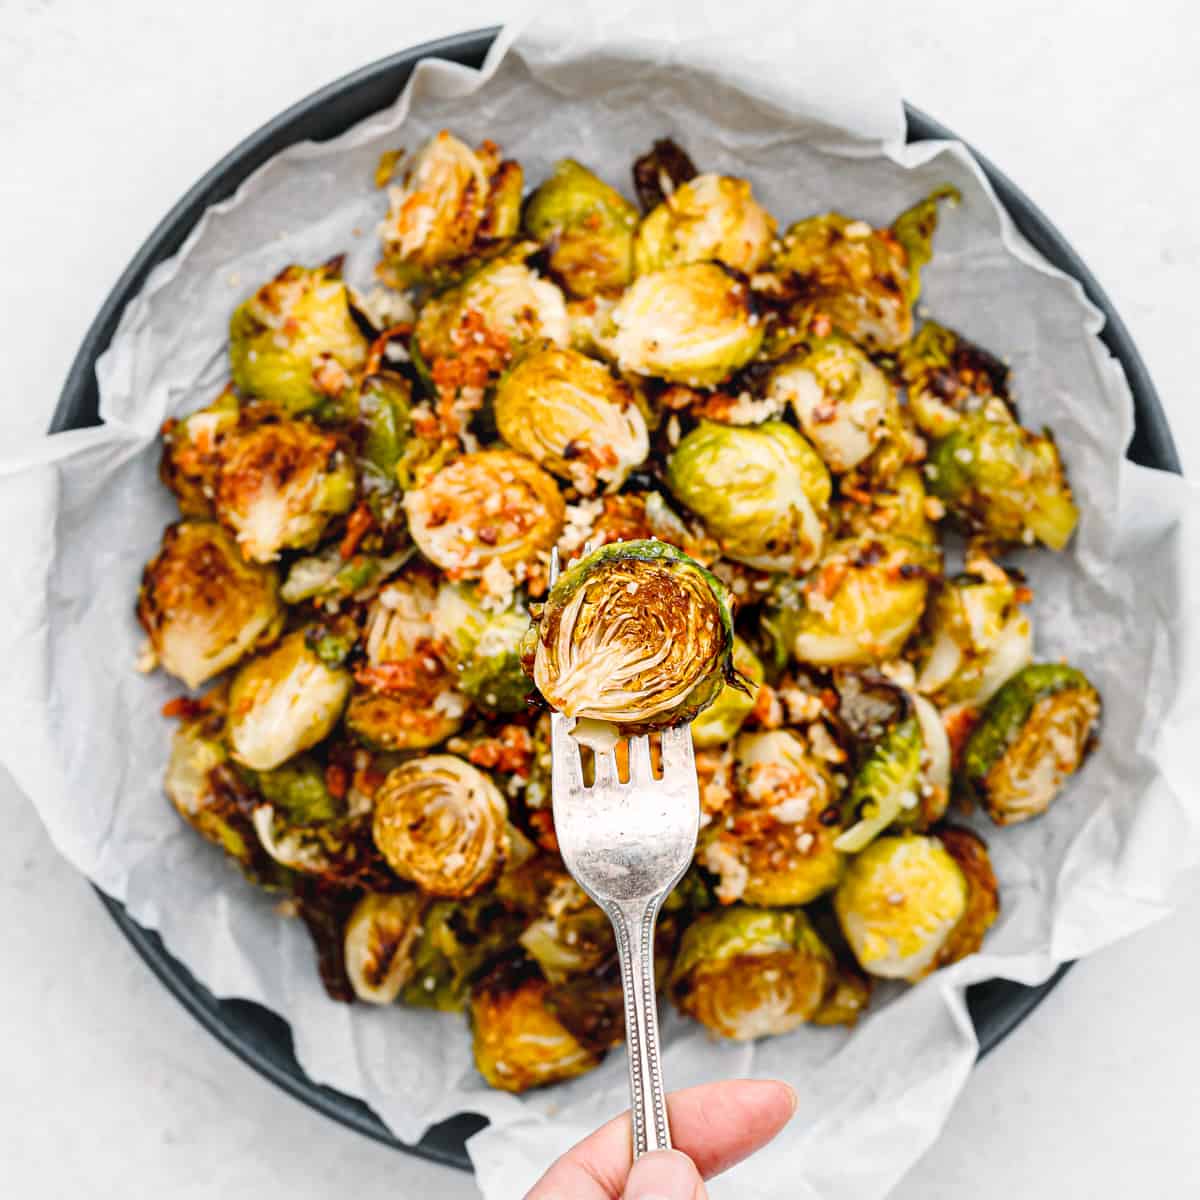 A hand holding a spoon and showing how crispy the brussels sprouts are